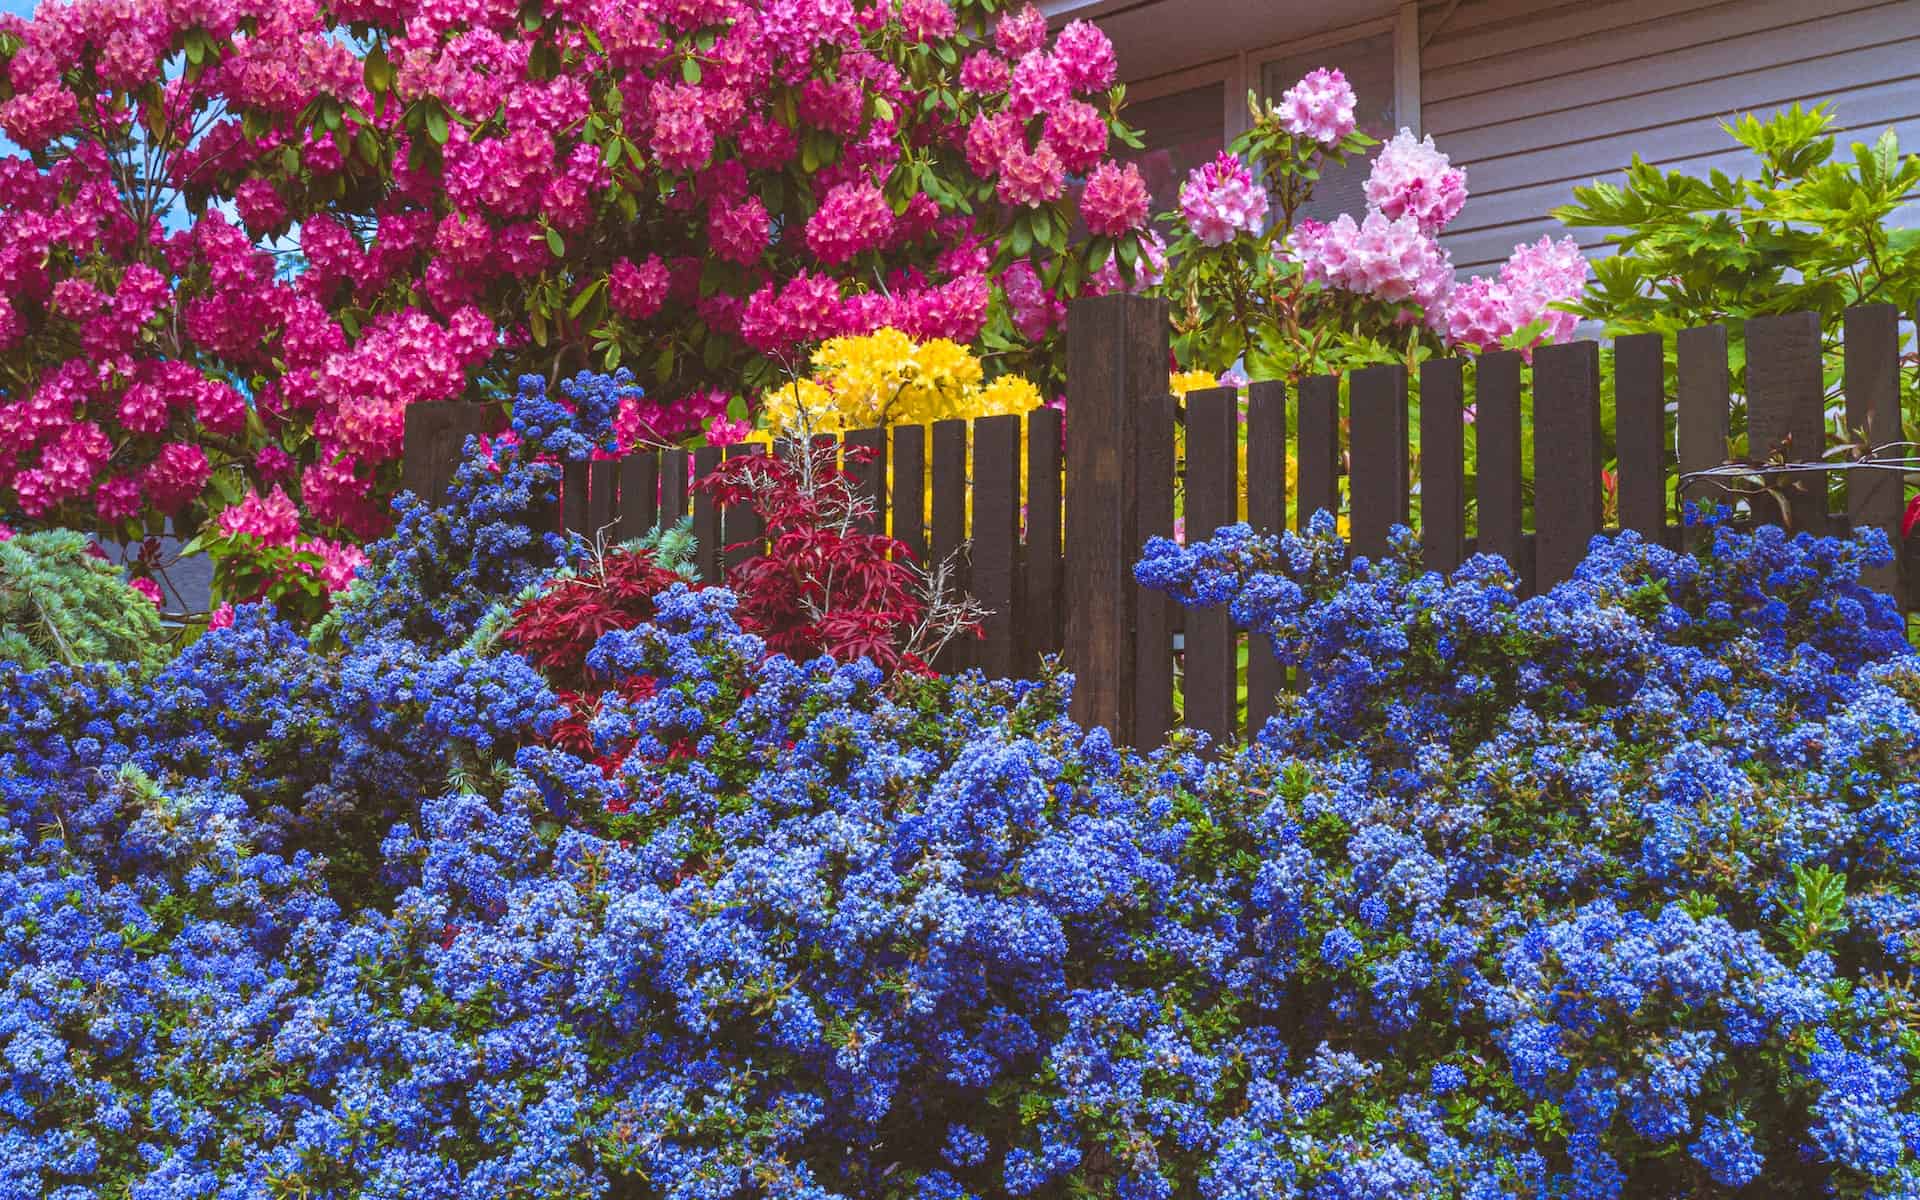 What are the most durable garden fences?